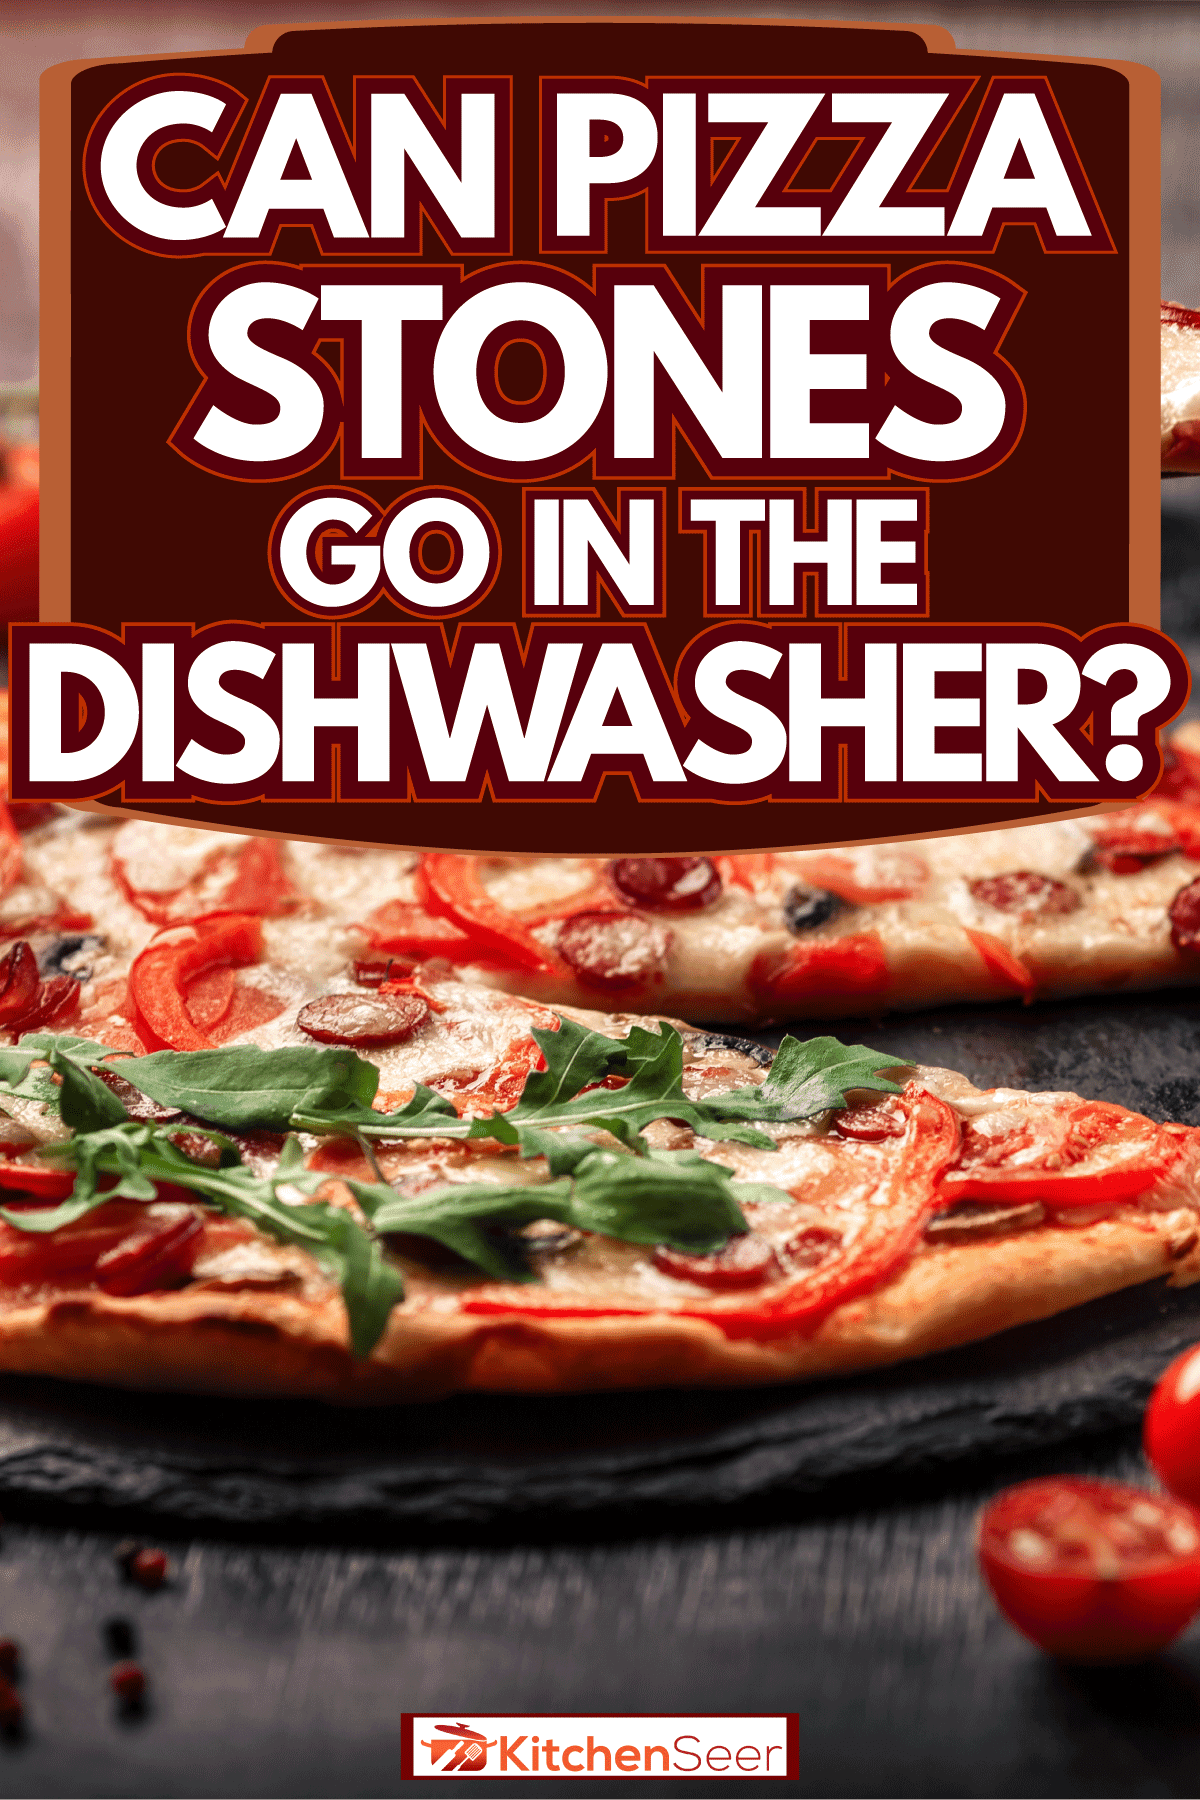 A delicious pepperoni pizza, Can Pizza Stones Go In The Dishwasher?